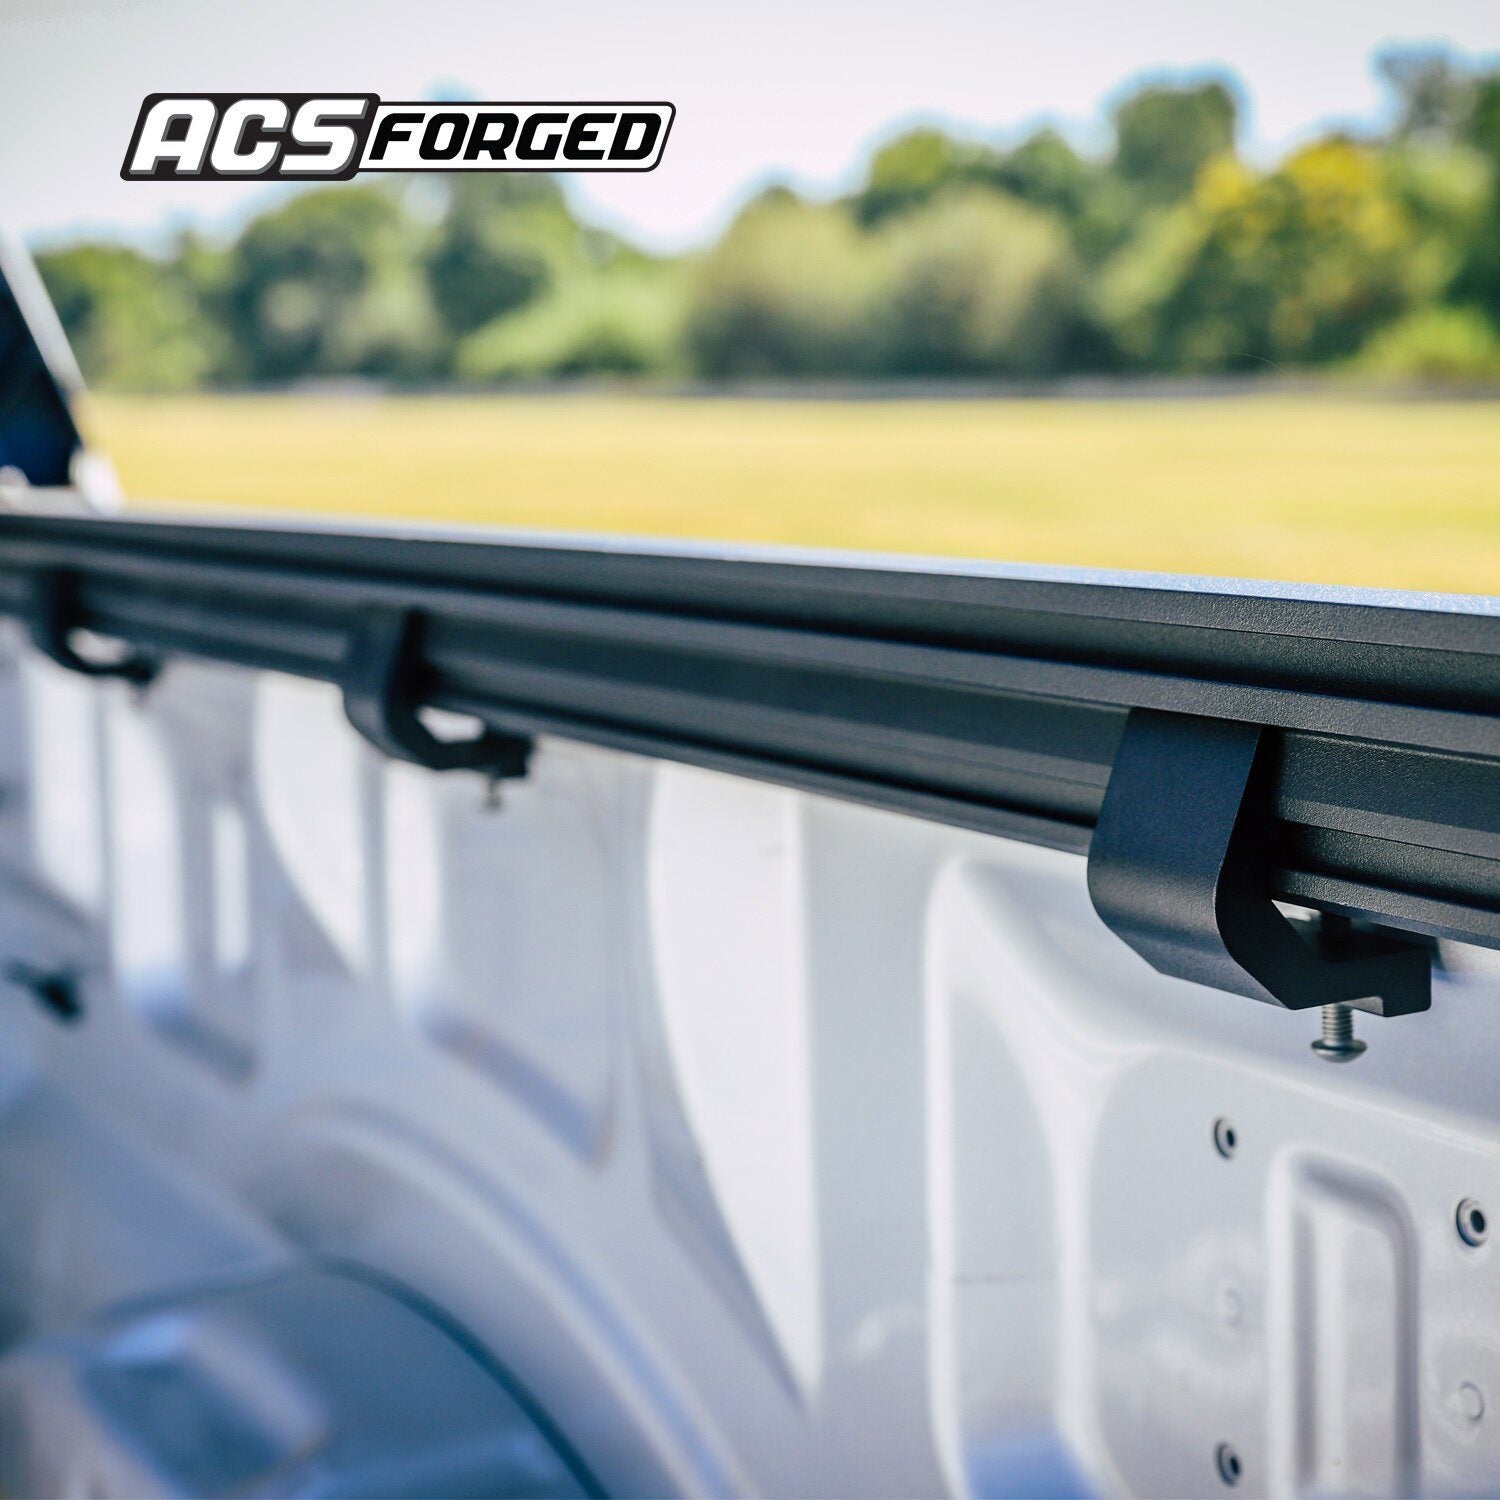 '09-20 Dodge Ram 2500/3500-ACS Forged Bed Accessories Leitner Designs close-up